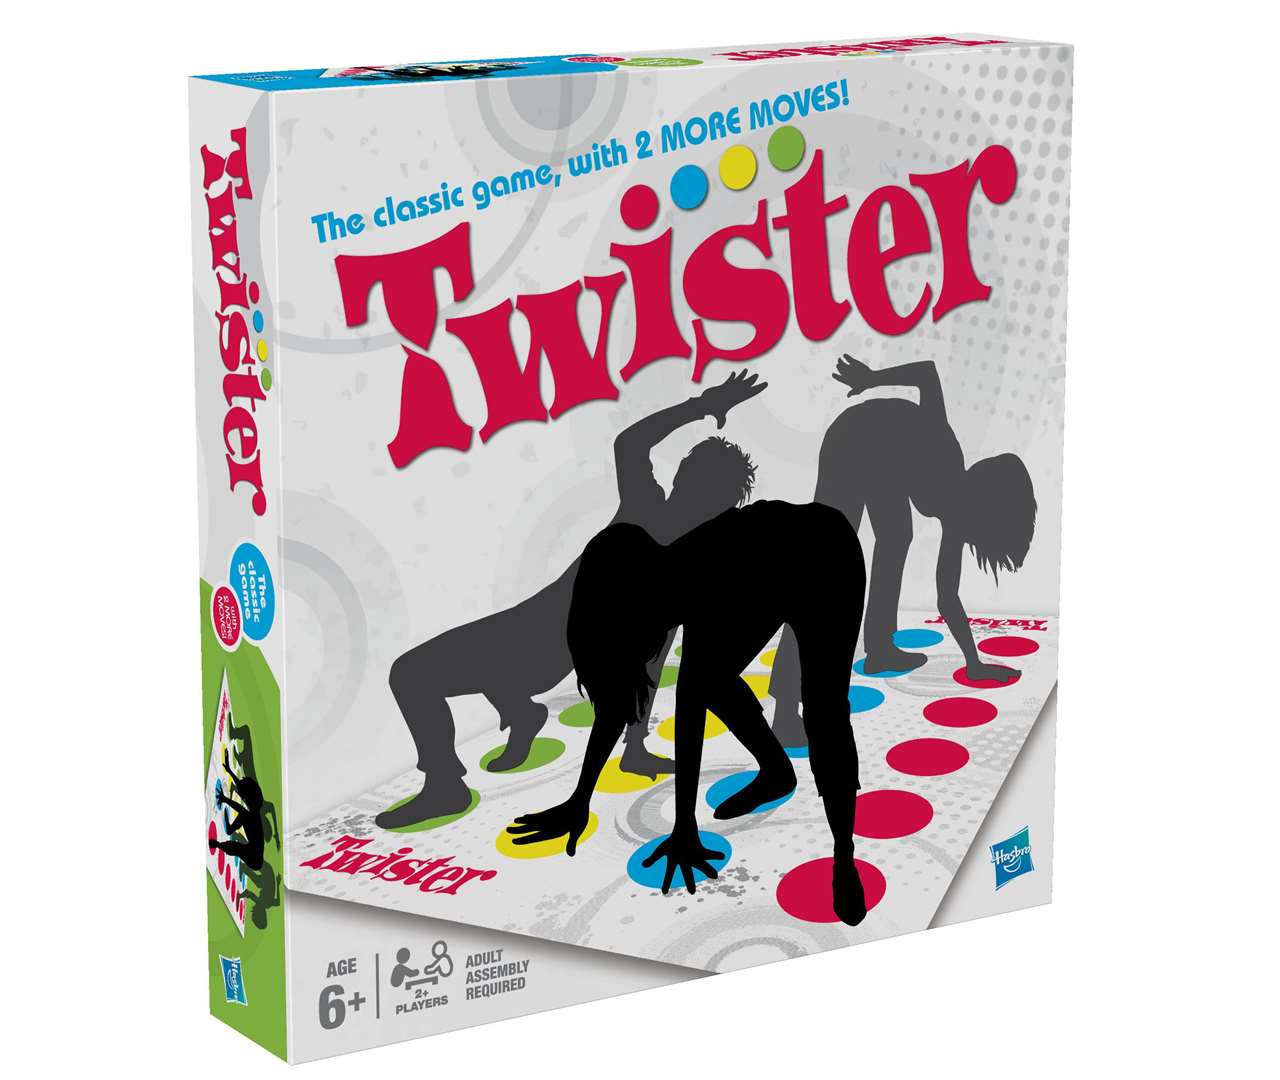 Twister is one of the classics Picture: PA Photo